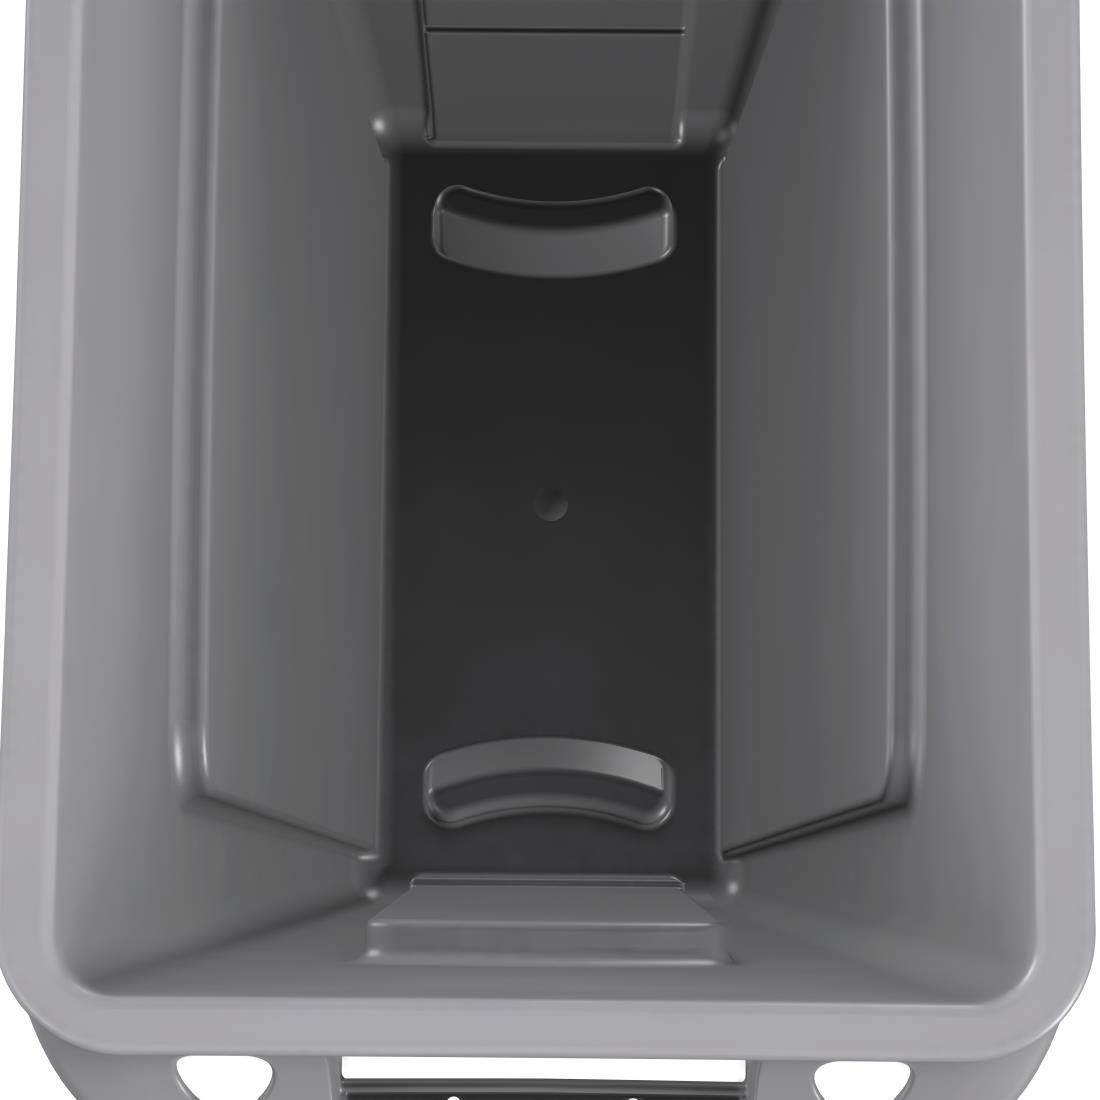 Rubbermaid Slim Jim Container With Venting Channels Grey 60Ltr - F603  - 12